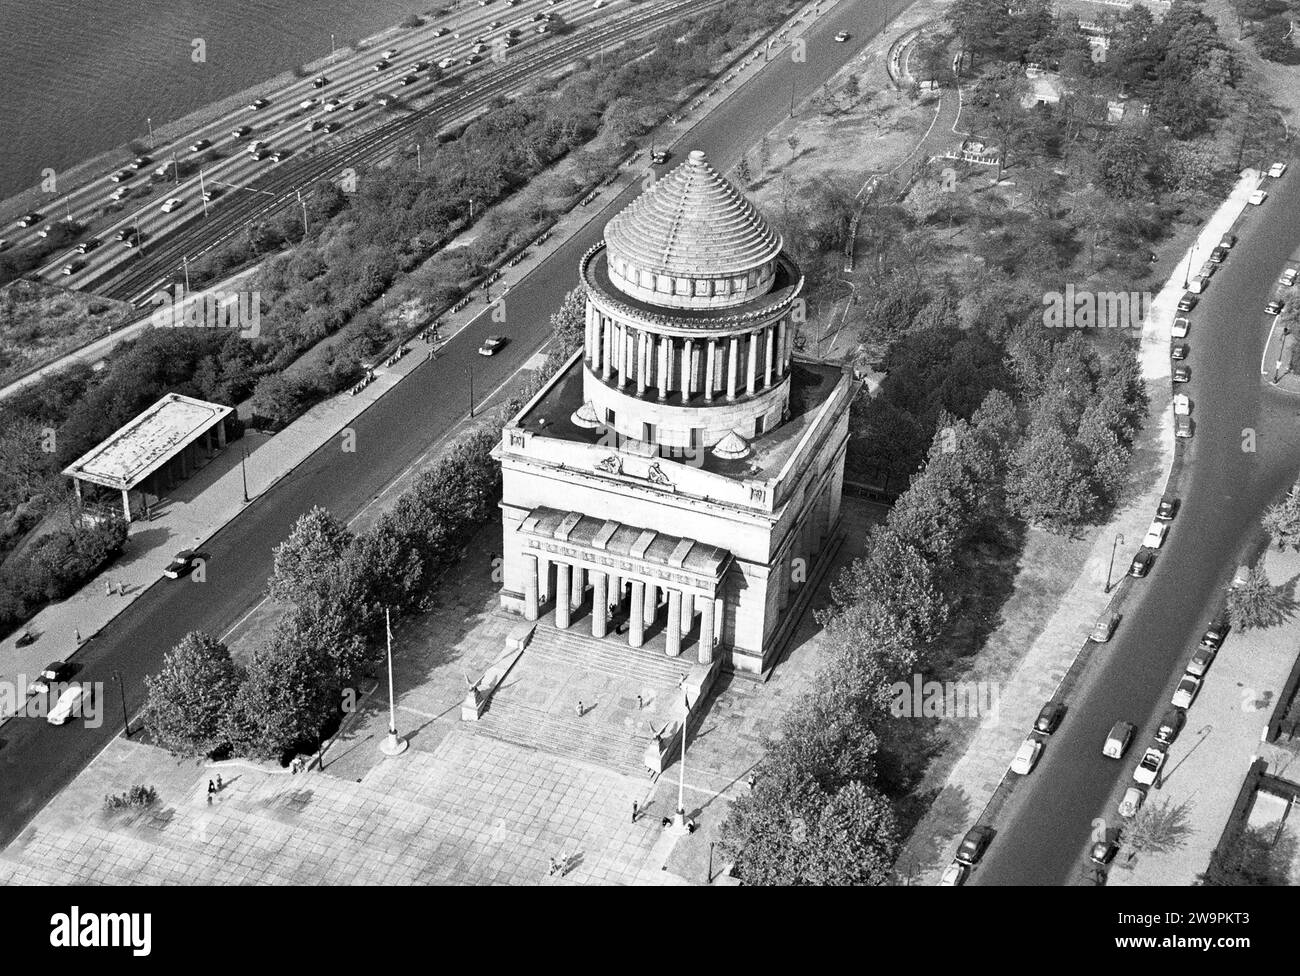 High angle view of Former U.S. President Ulysses S. Grant's tomb, Riverside, Drive, New York City, New York, USA, Angelo Rizzuto, Anthony Angel Collection Stock Photo